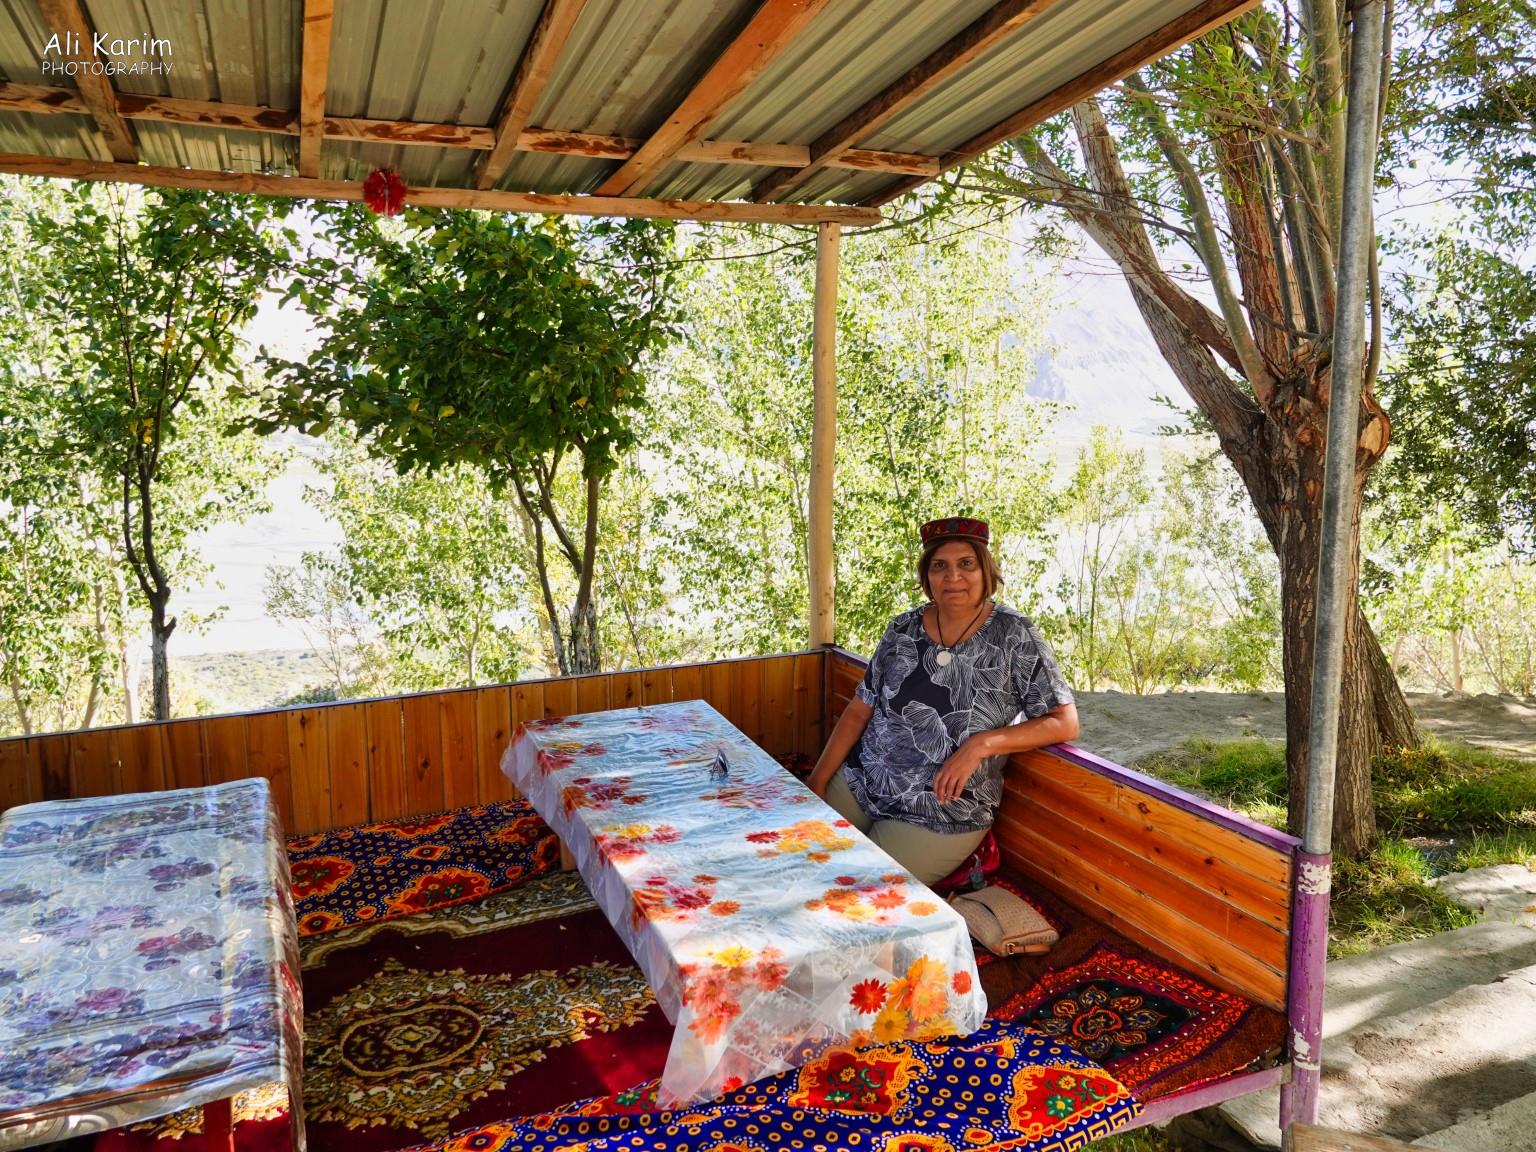 Langar, Bulunkul Tajikistan, Lunch at Churshanbe homestay high-up overlooking the Panj river and Afghanistan opposite.